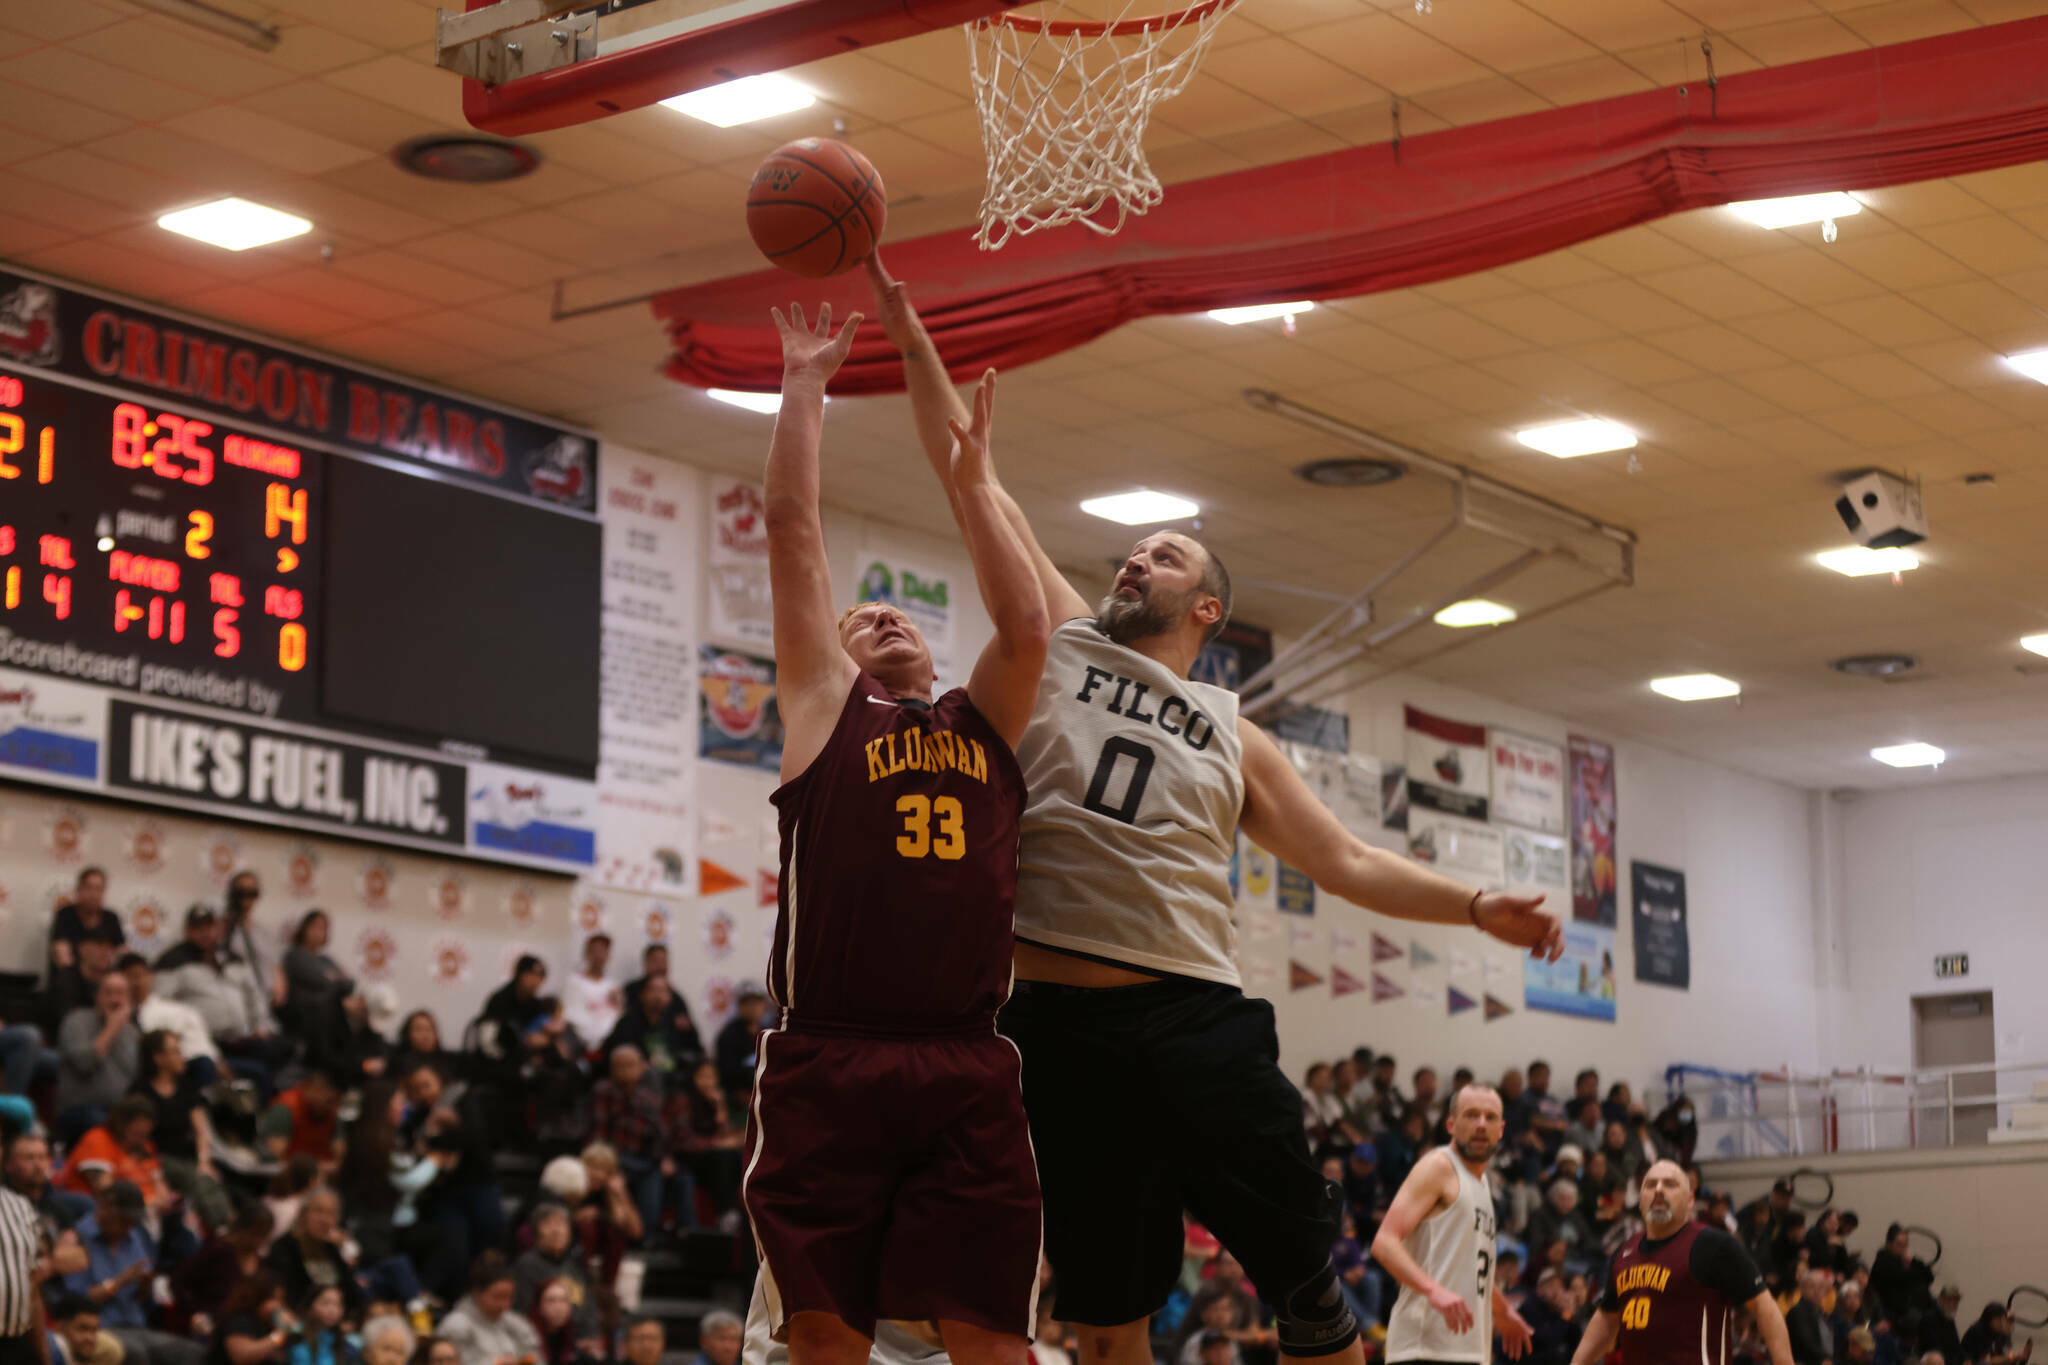 Filcom’s Ray Zimmer (0) blocks a shot from Klukwan’s Jess McGraw in the first half of the Juneau Lions Club 74th Gold Medal Basketball Tournament C Bracket Championship Game on Saturday, March 26, 2023, in Juneau-Douglas High School: Yadaa.at Kalé’s gymnasium. (Ben Hohenstatt / Juneau Empire file photo)